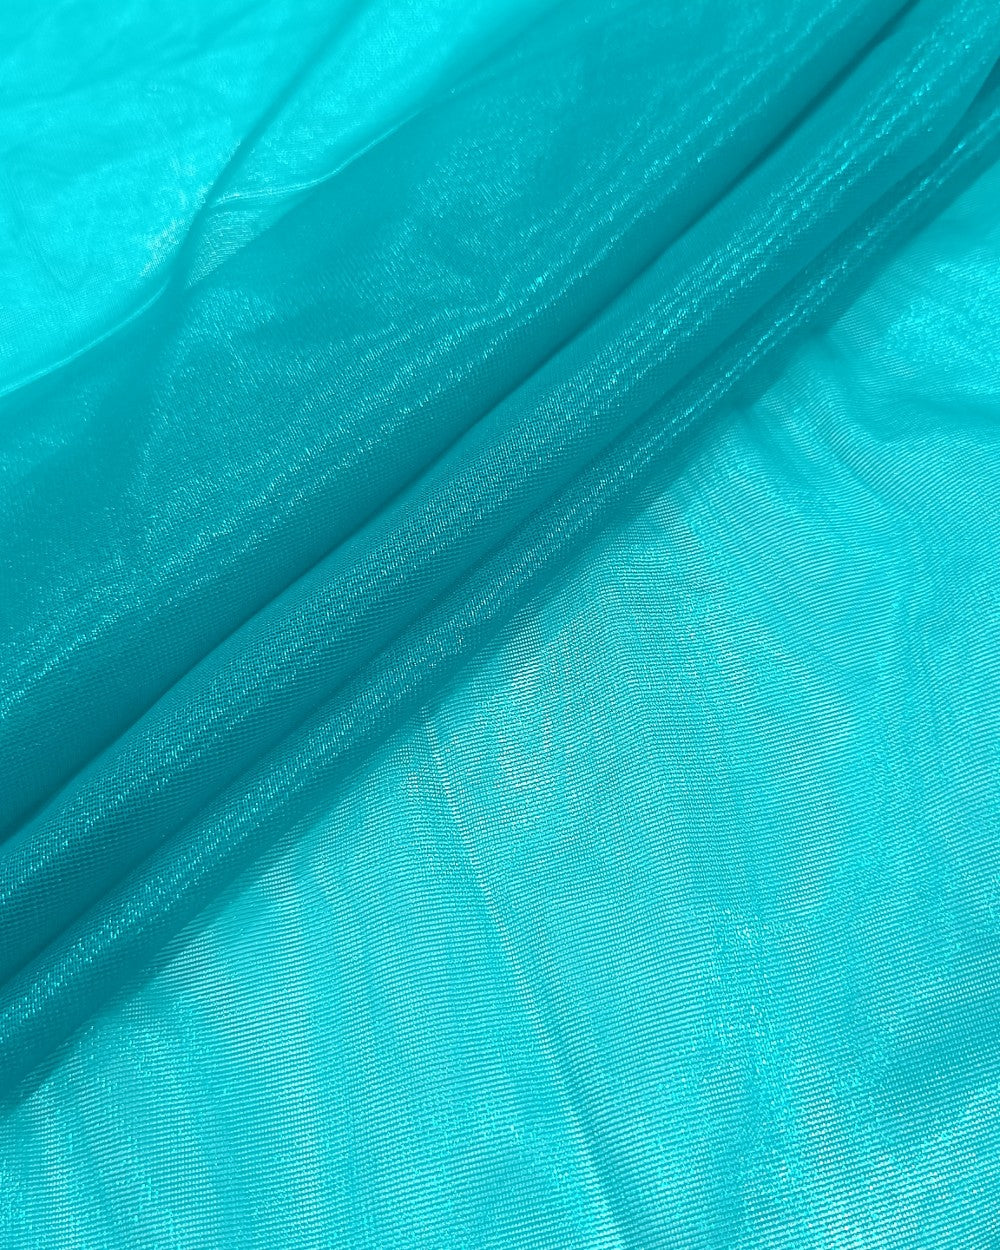 Twill Net Saree Without Blouse Peacock Green(Morpankhi) Colour 47 Inches Width